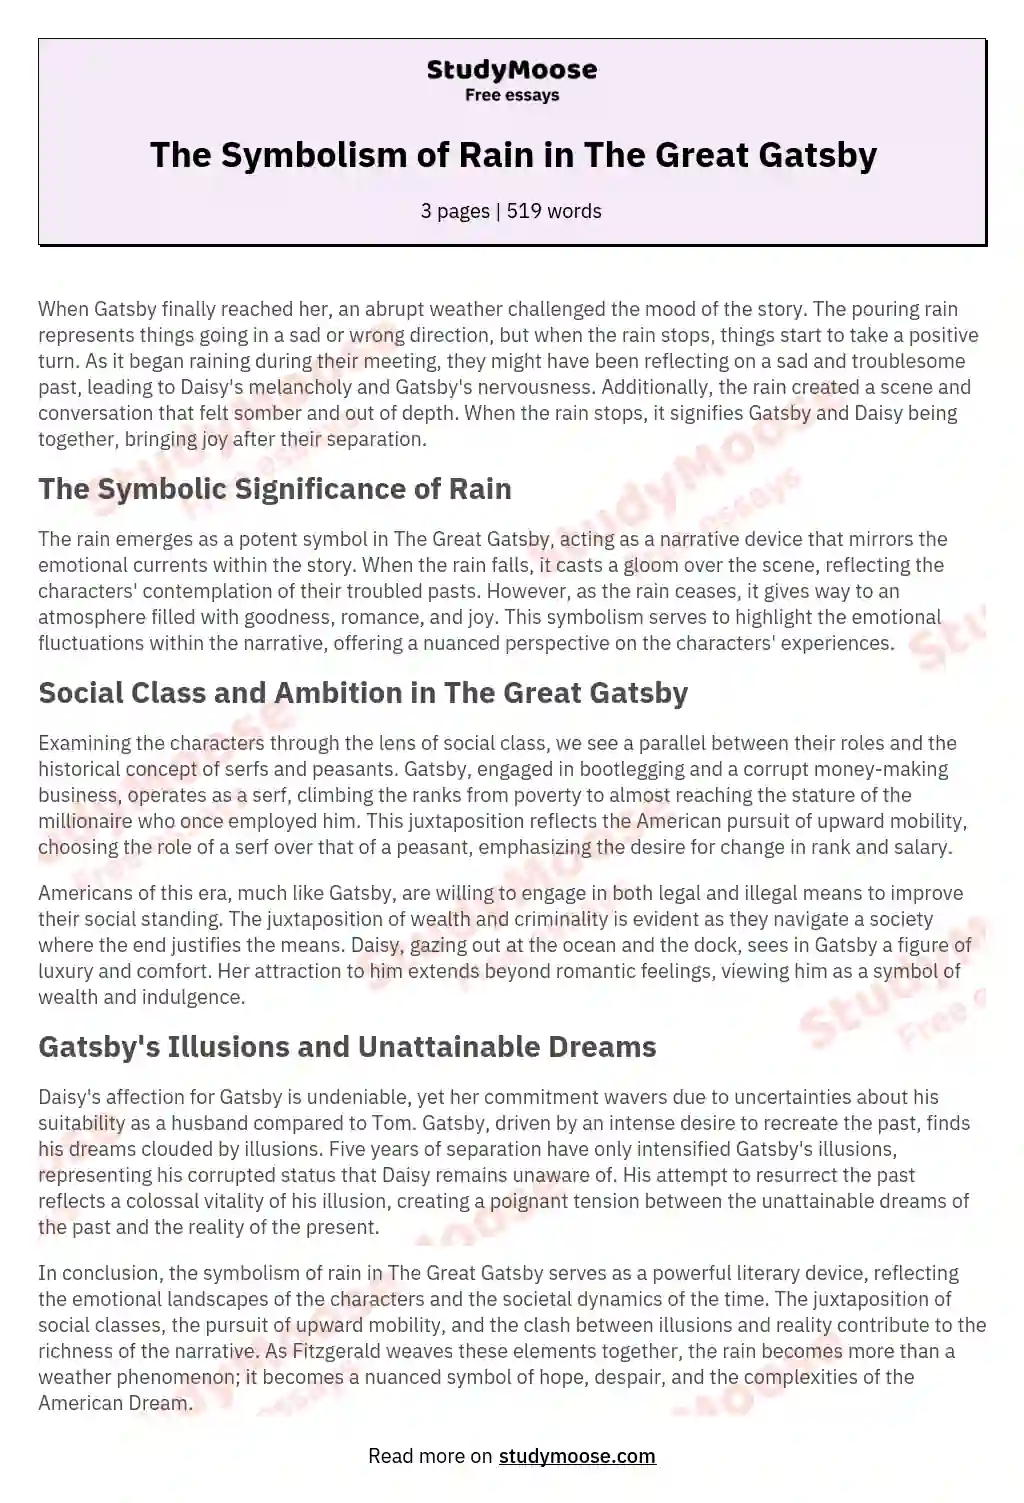 The Symbolism of Rain in The Great Gatsby essay